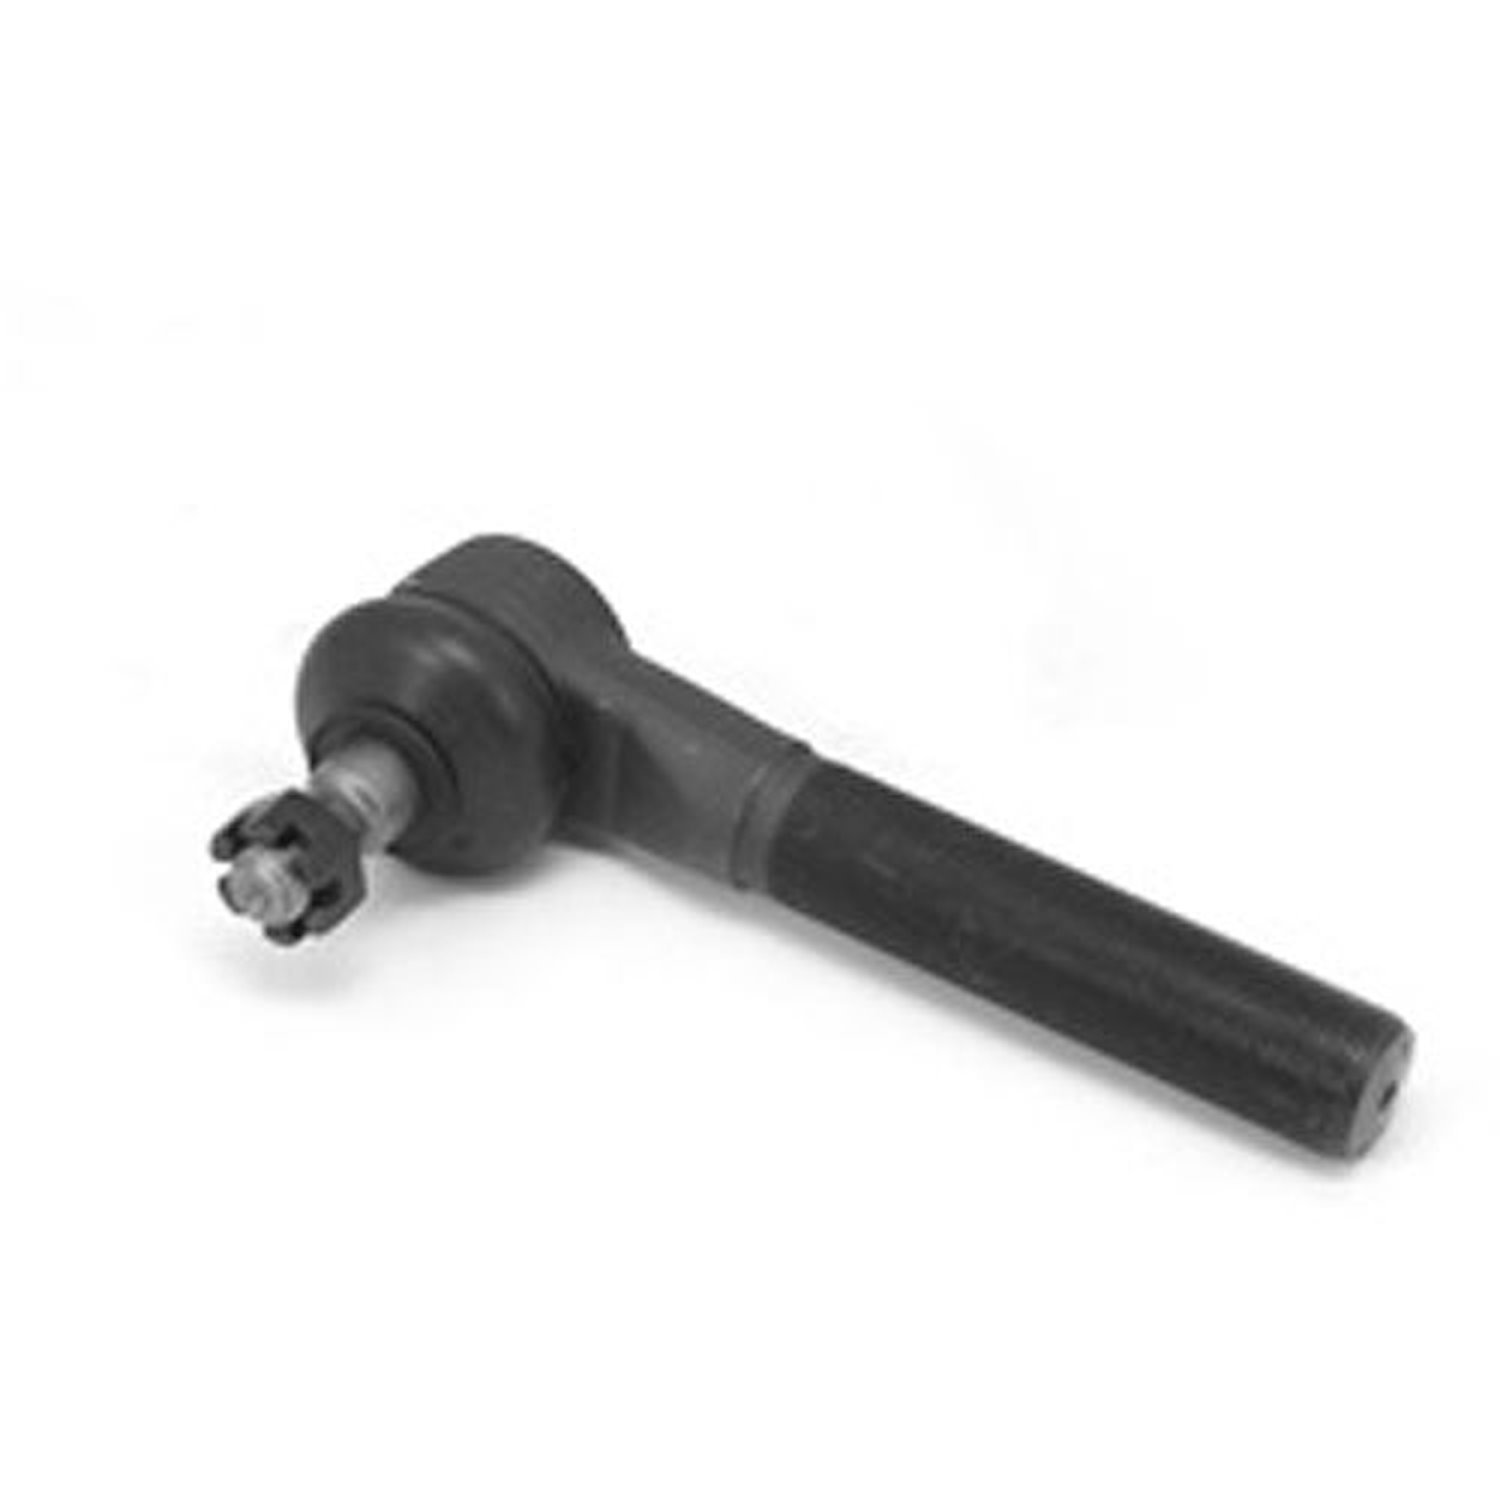 Replacement tie rod end from Omix-ADA threads into